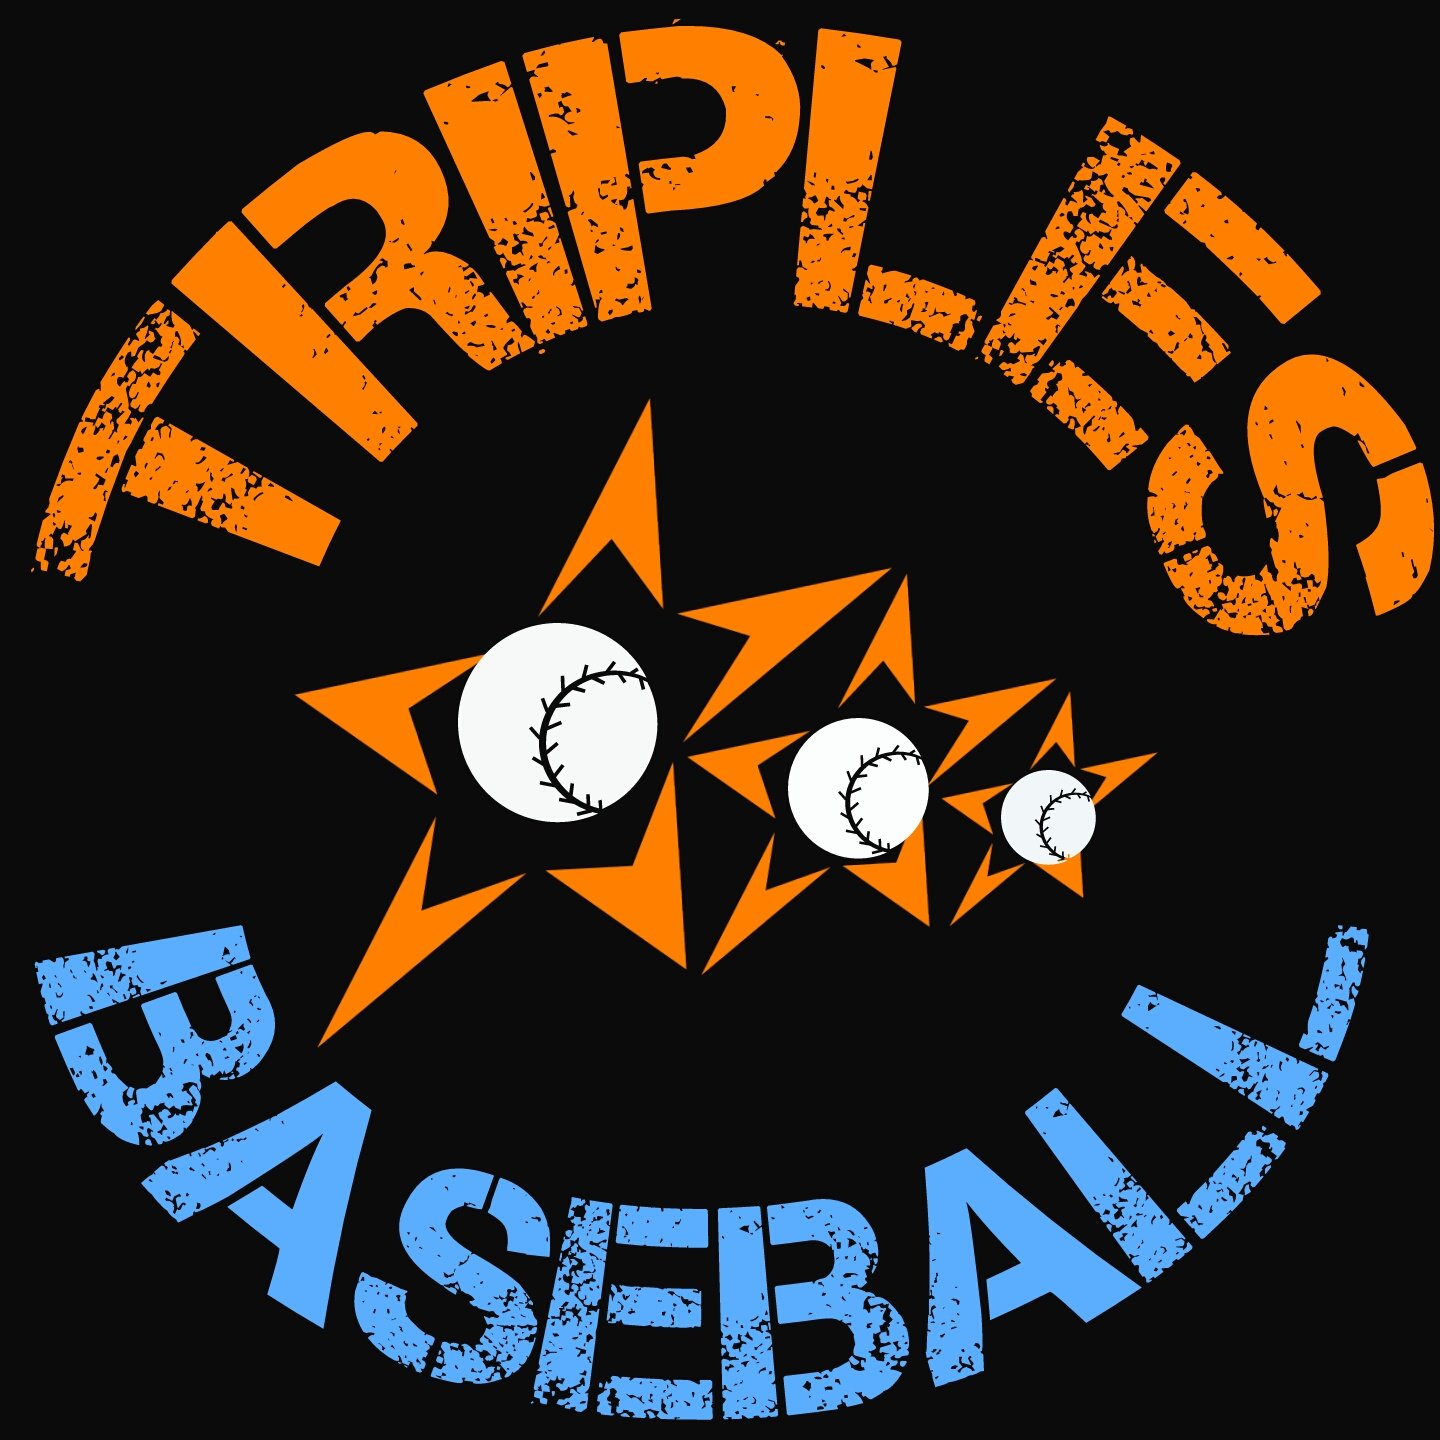 The Houston Triples play competitive baseball in the  Houston Coastal Collegiate/ Adult League (NABF) ** WOOD BAT. Coached/ managed by Ex- Pro player. est. 2015